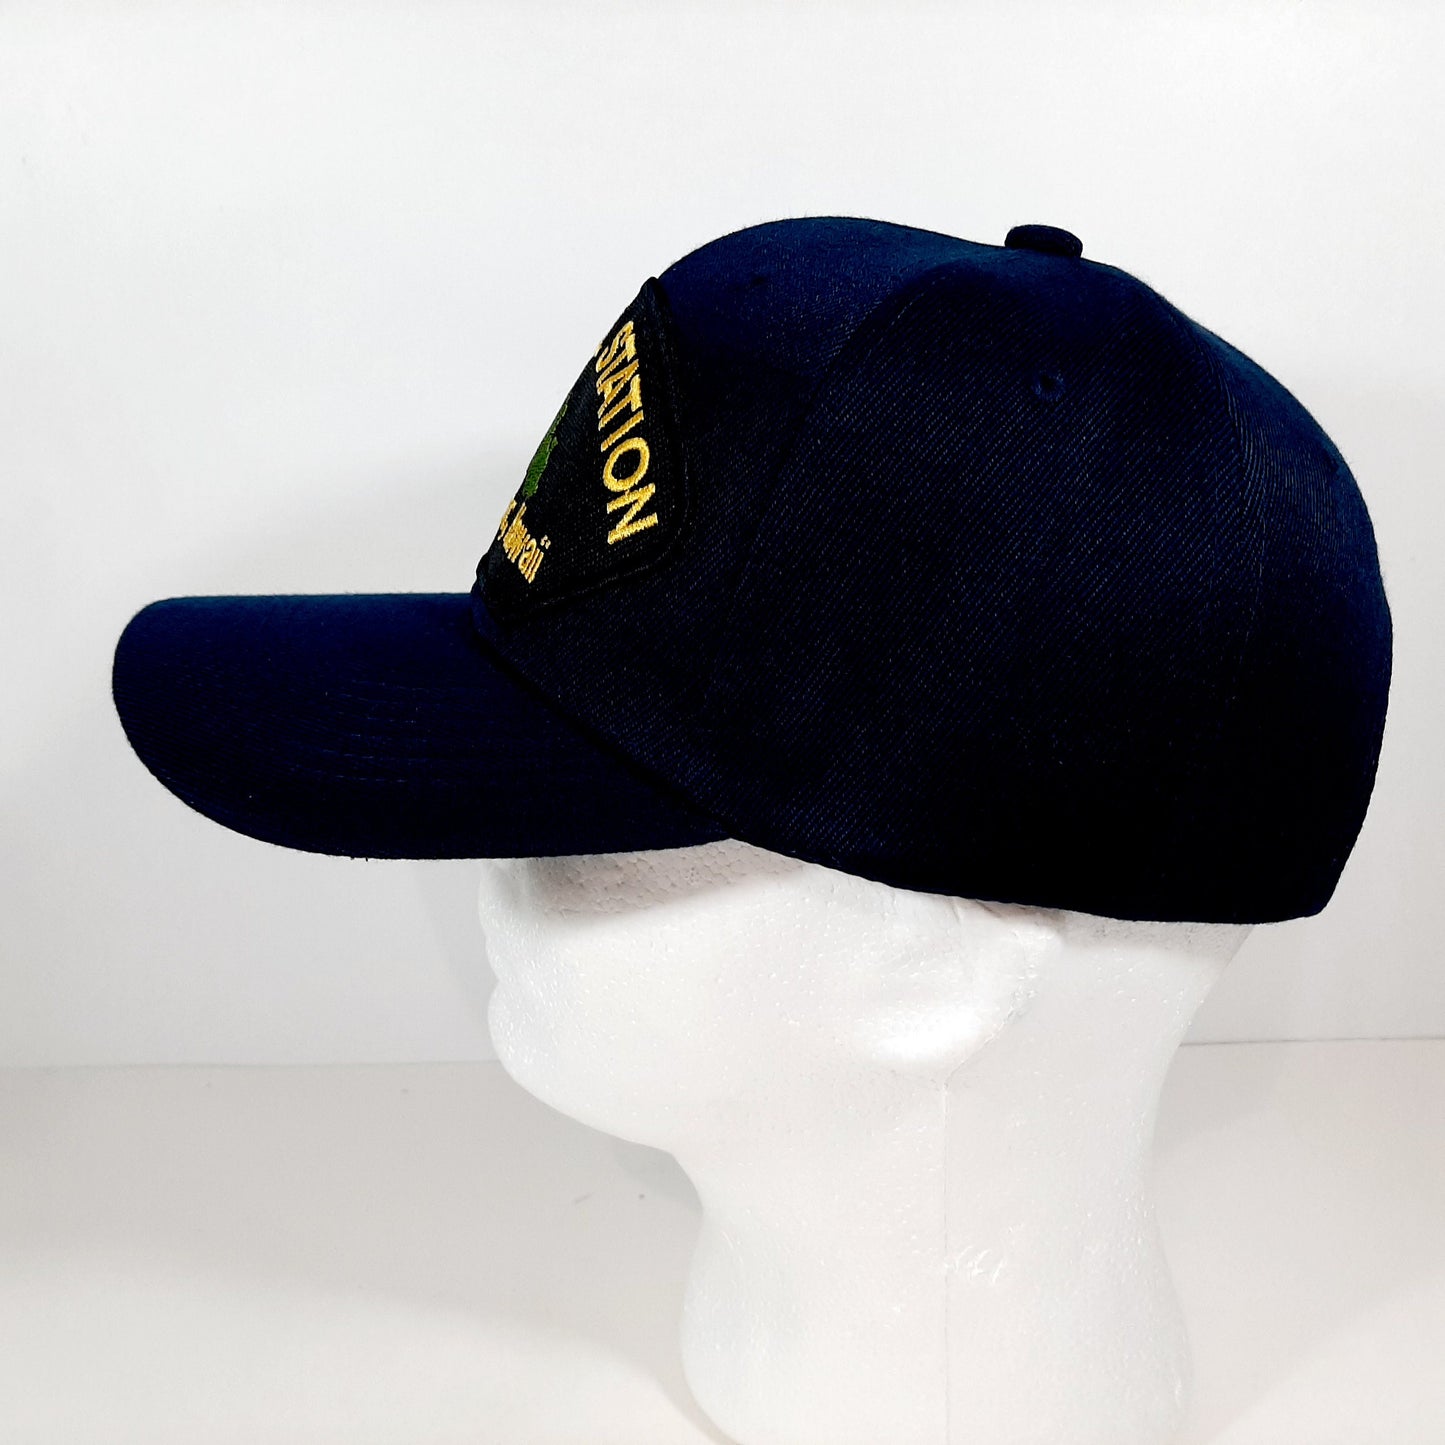 Naval Station Pearl Harbor Hawaii Embroidered Patch Hat Baseball Cap Blue